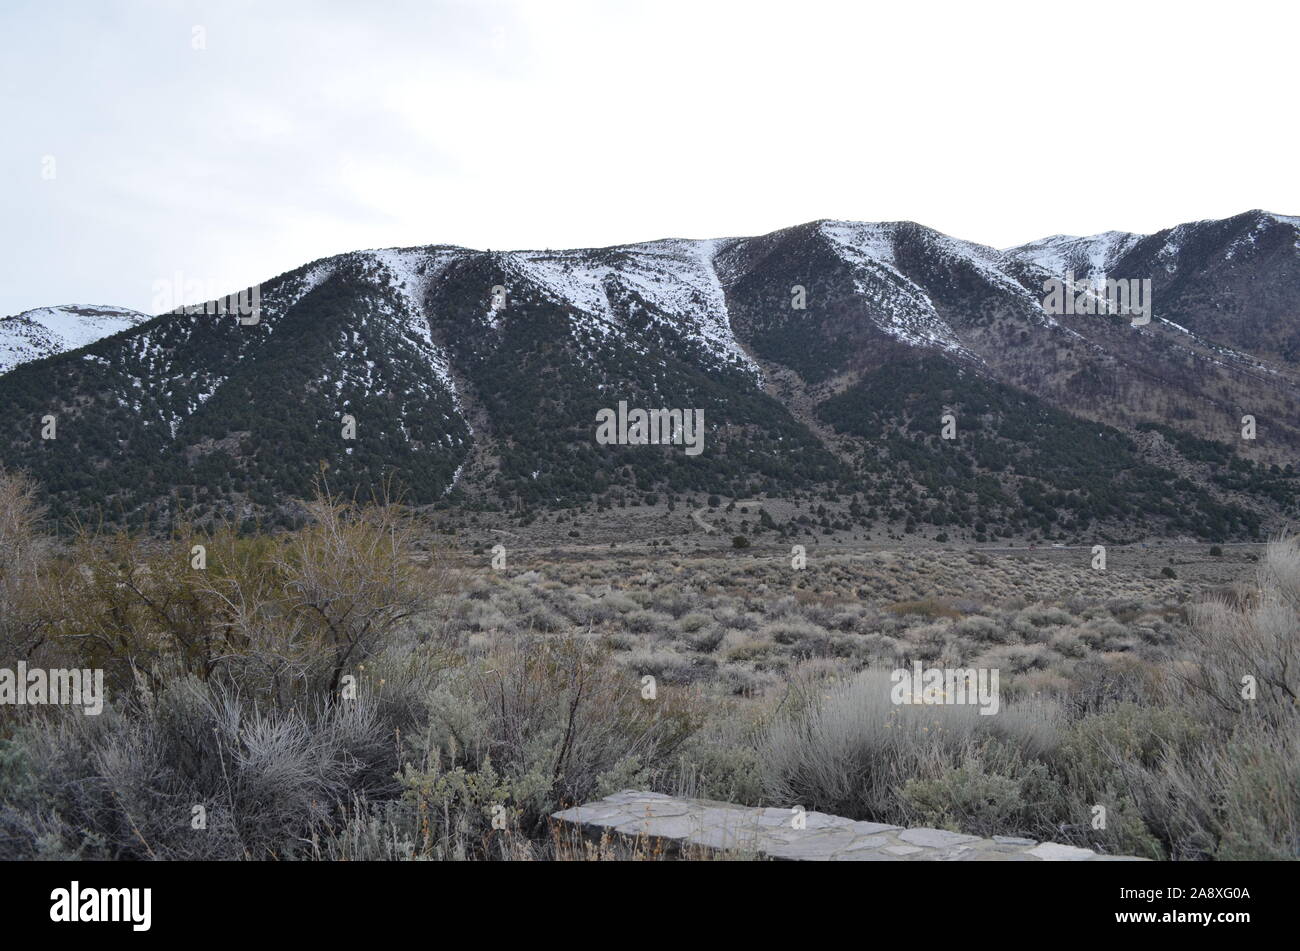 Early Spring in California: Snow-dusted Sierra Nevada Mountains Stock Photo